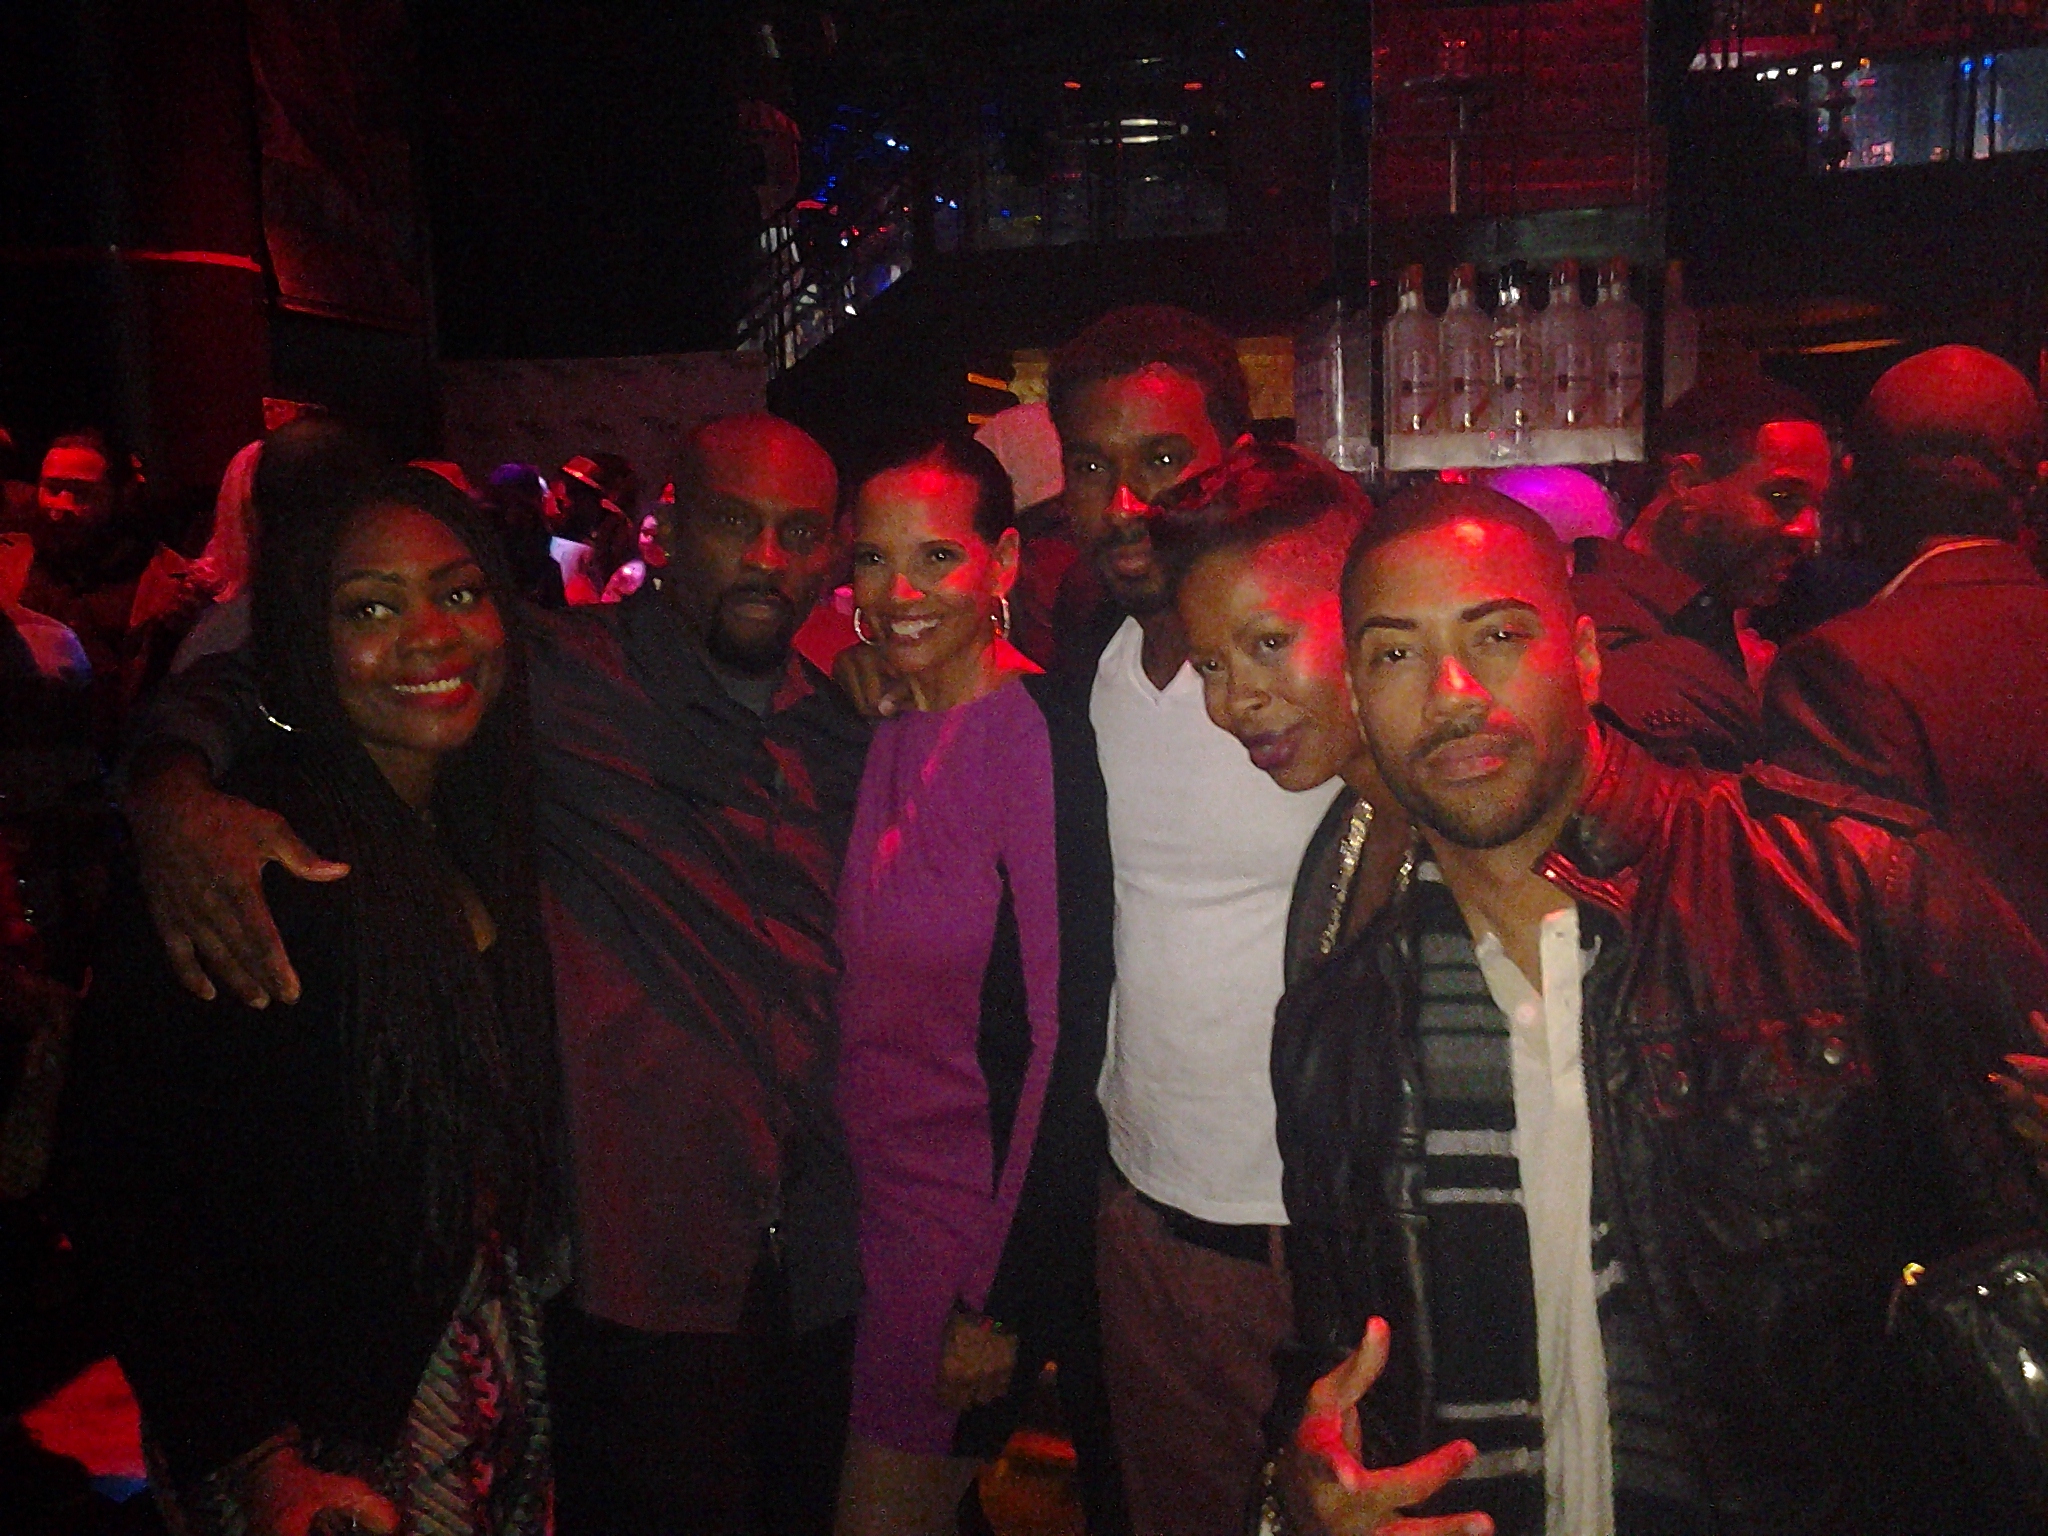 Ro Brooks, Shari Headley, Medina Islam and Brad James at the Wrap Party for The Haves and the Have Nots.